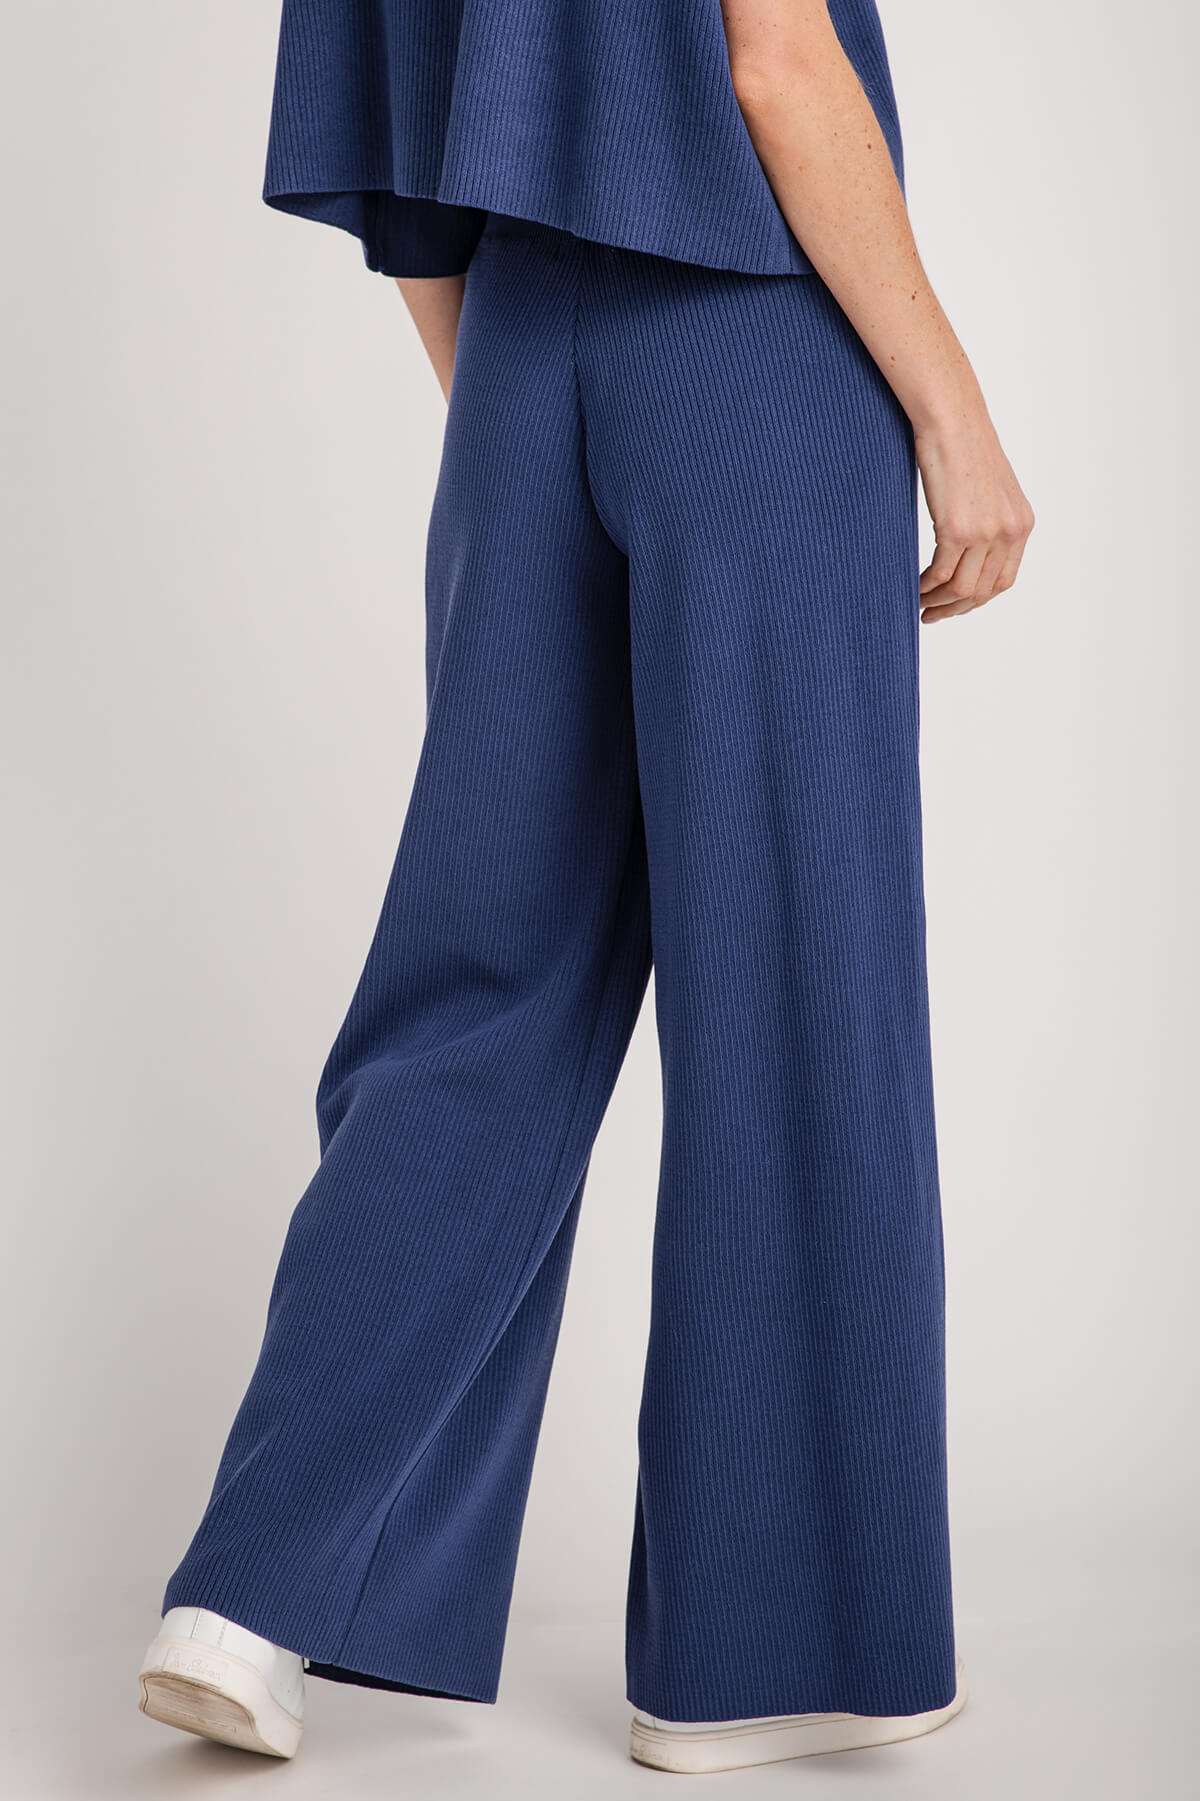 By Together Wideleg Knit Pant